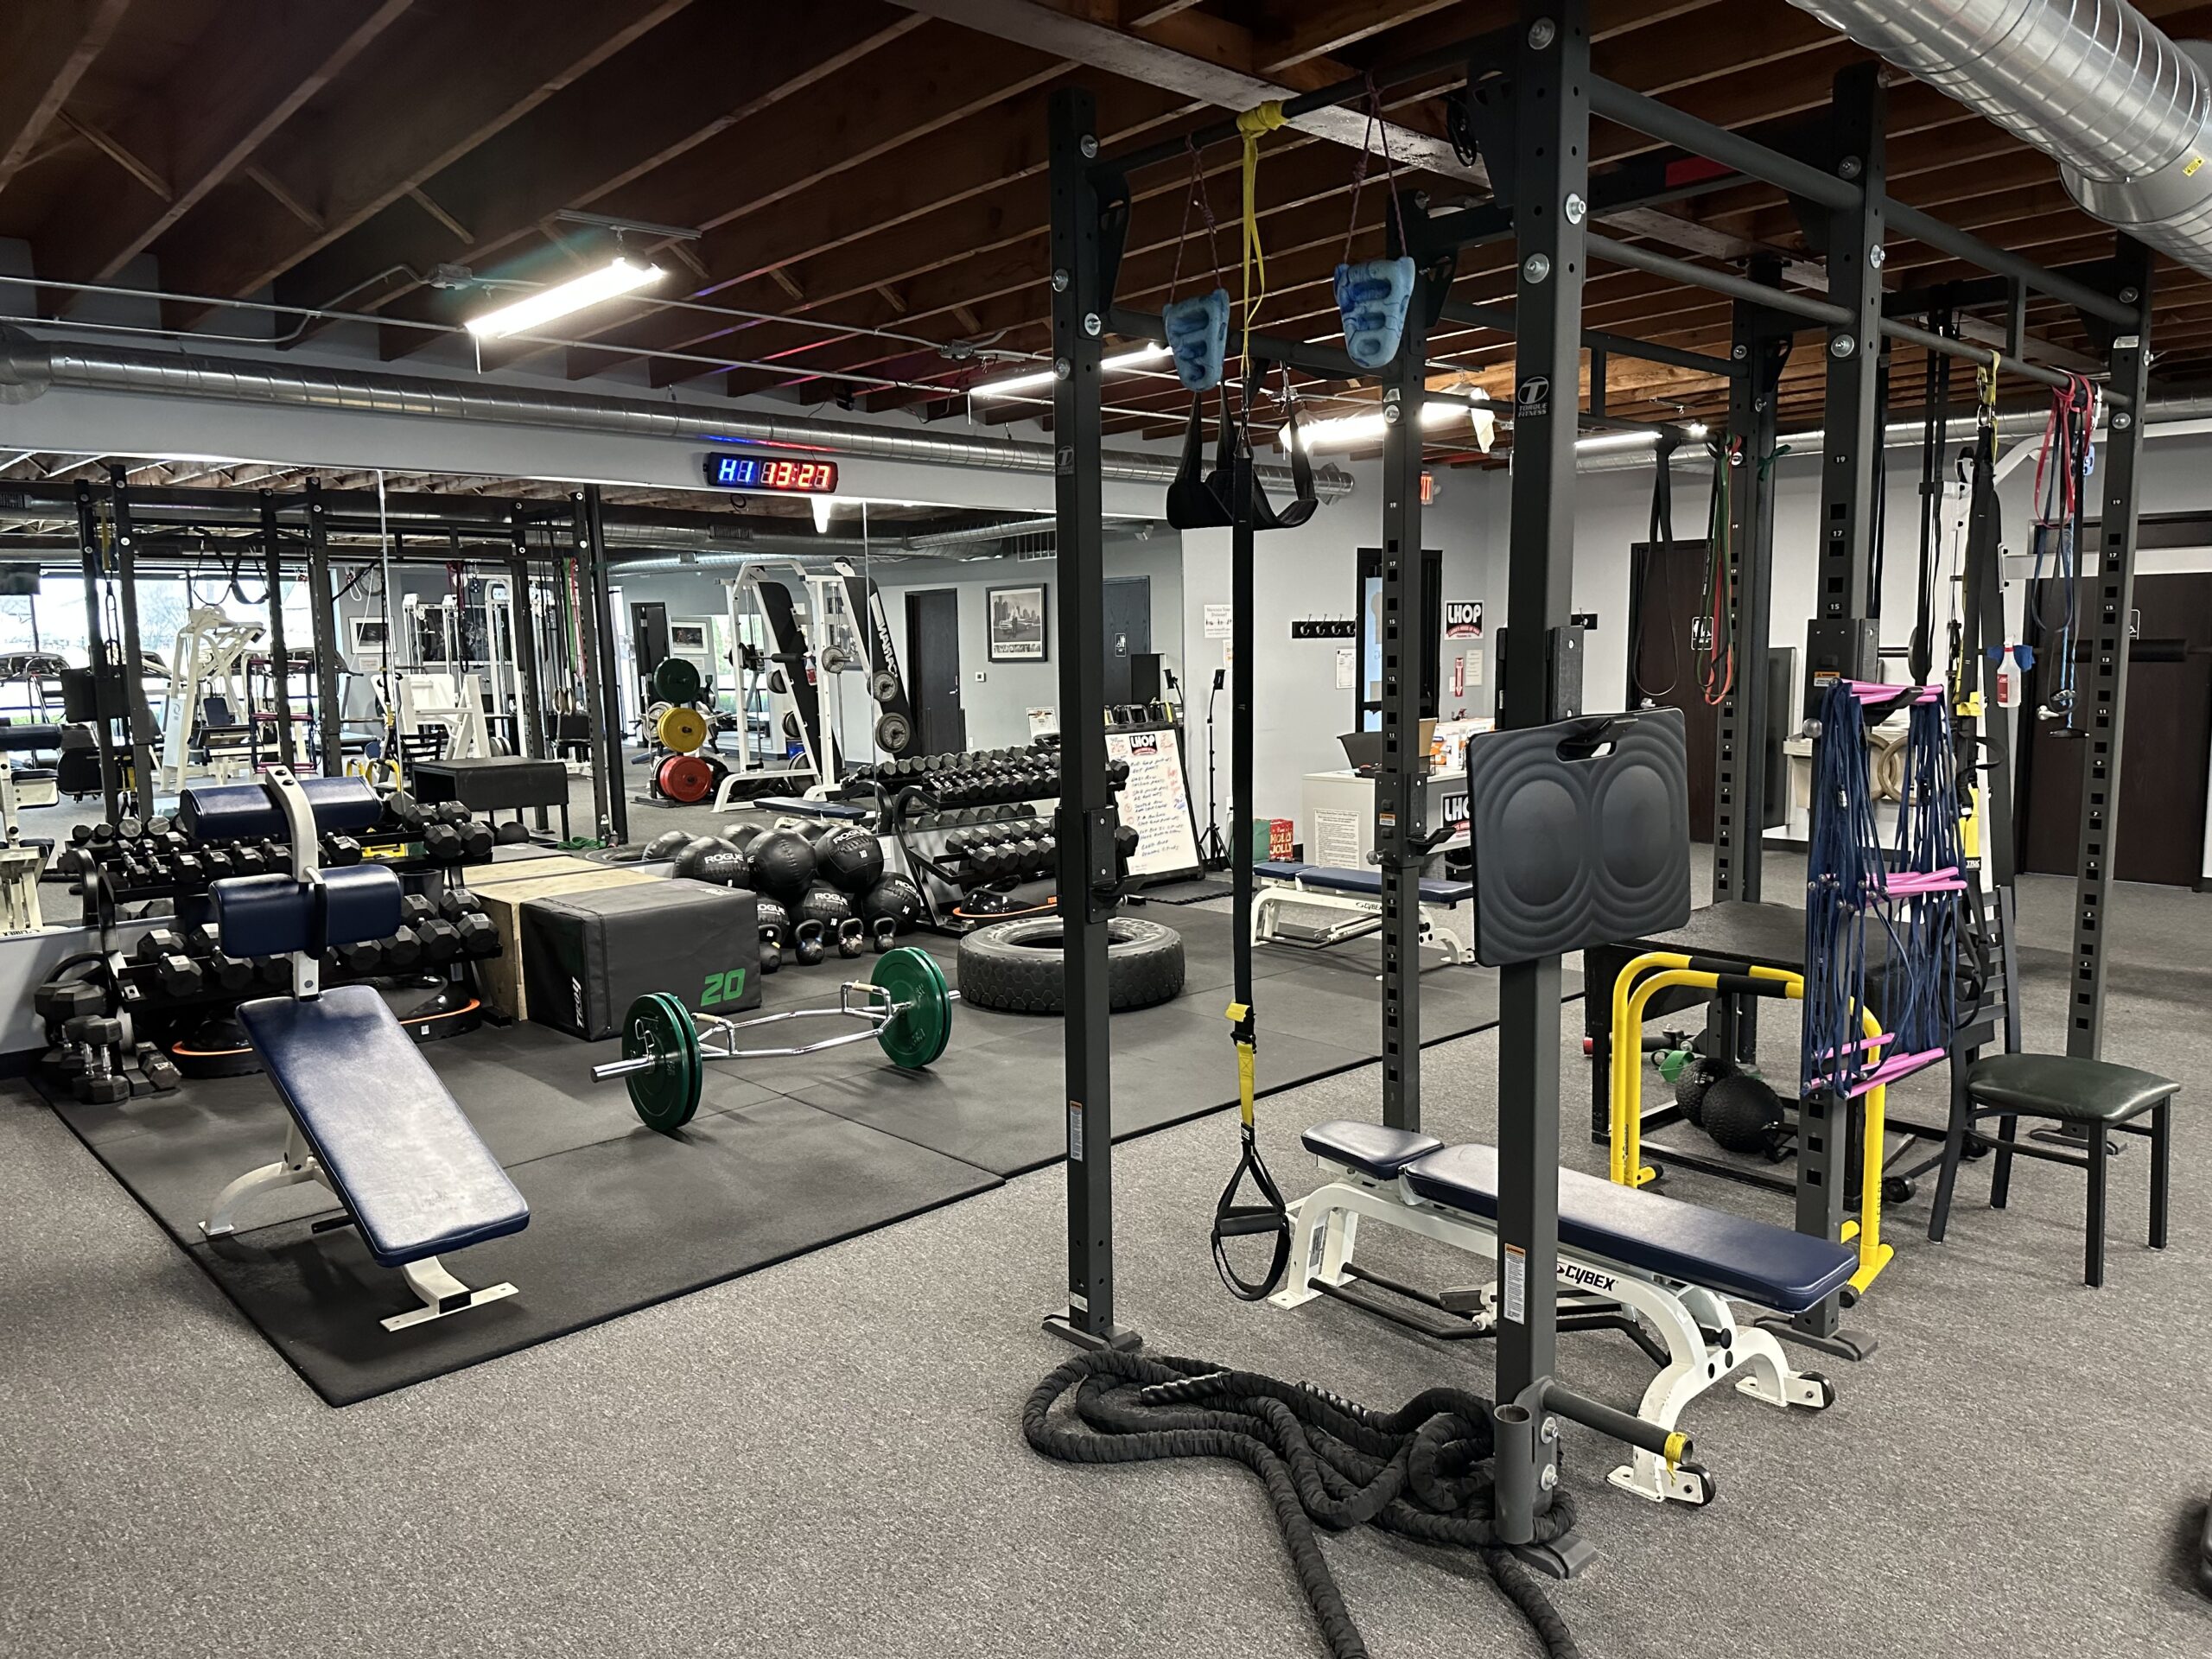 The Training Room is stocked with muscle-strengthening machines.